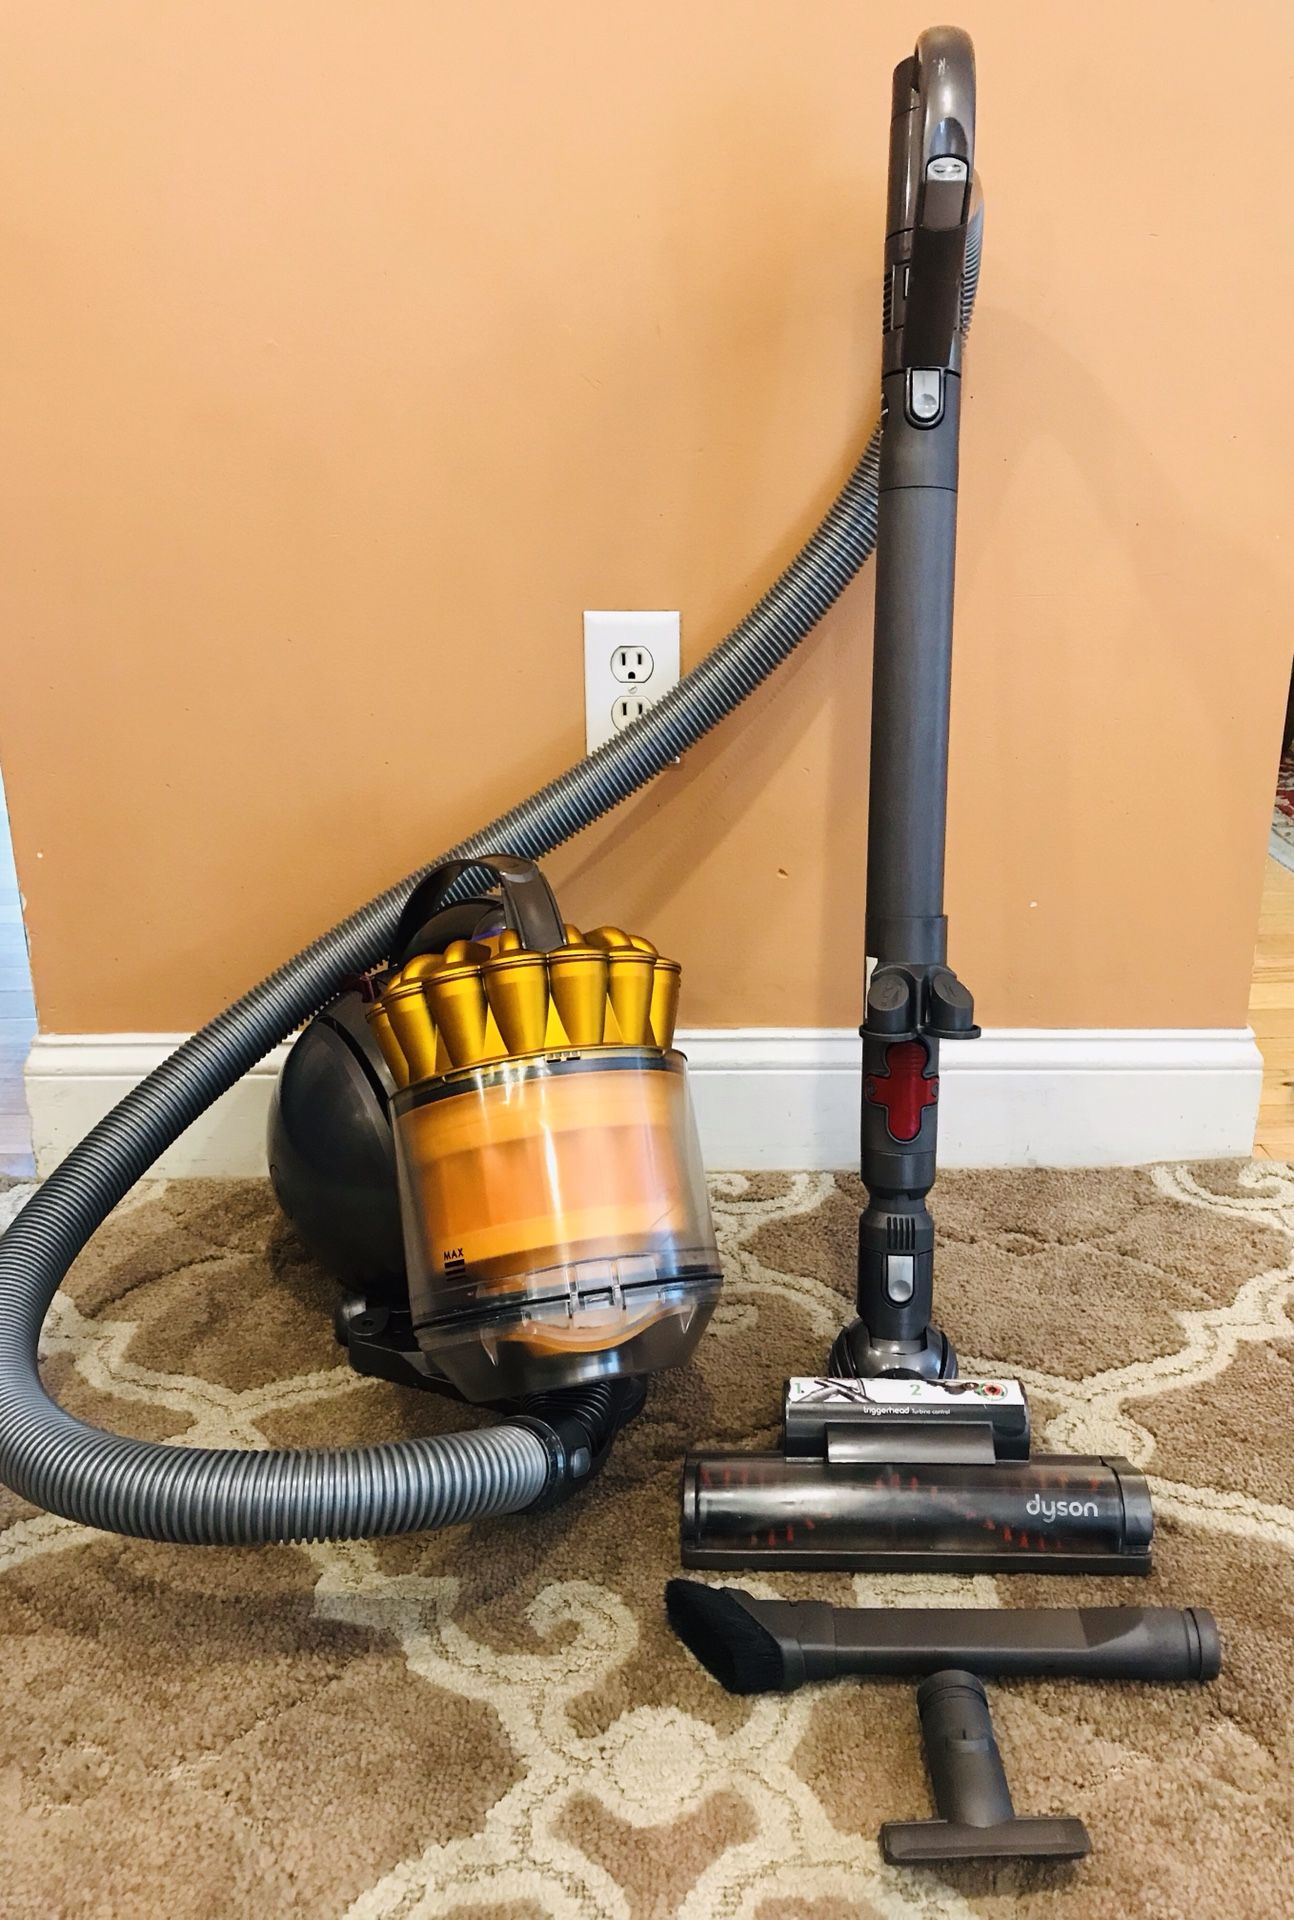 Dyson Dc39 Canister Vacuum Cleaner